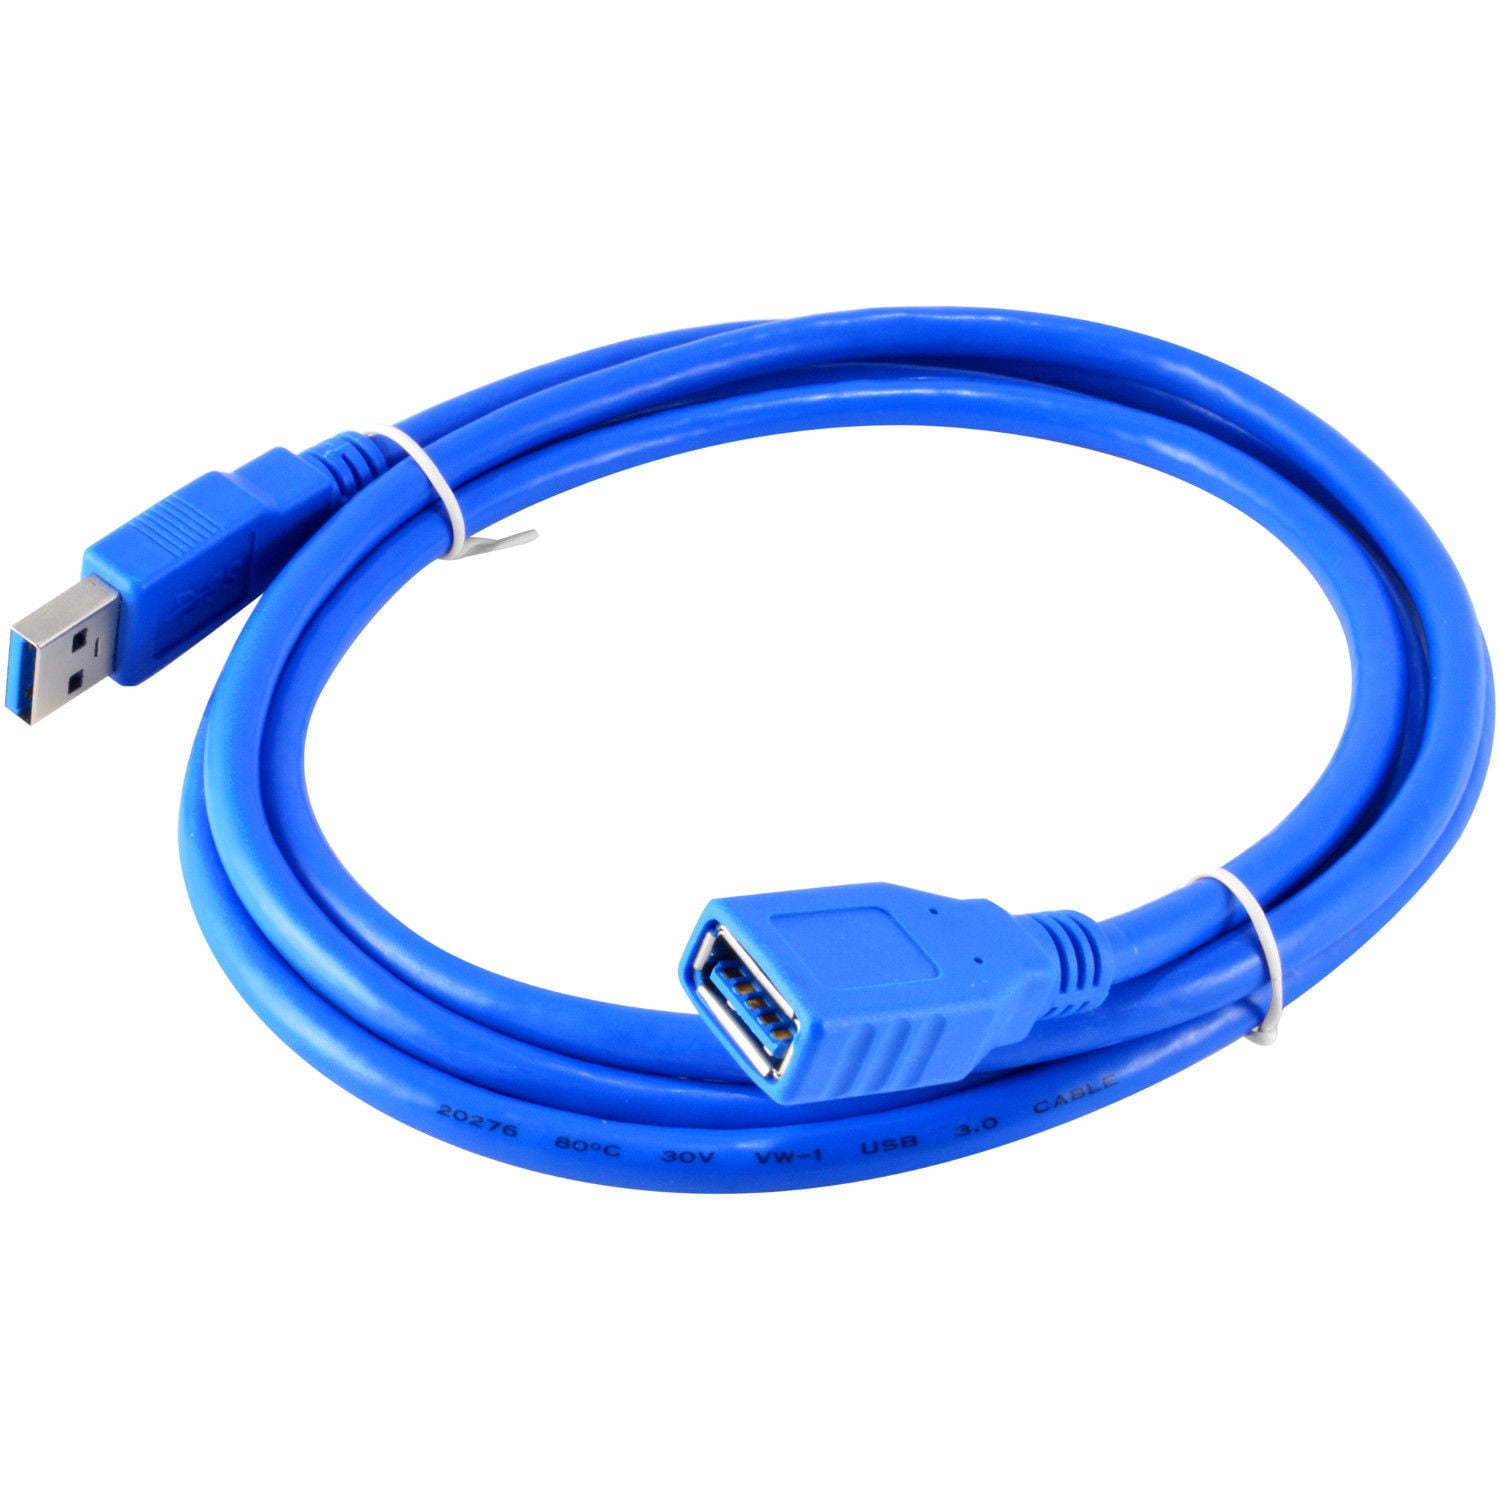 1Pc USB 3.0 Extension Cable High Speed A Male to Female Data Sync Extender Blue 